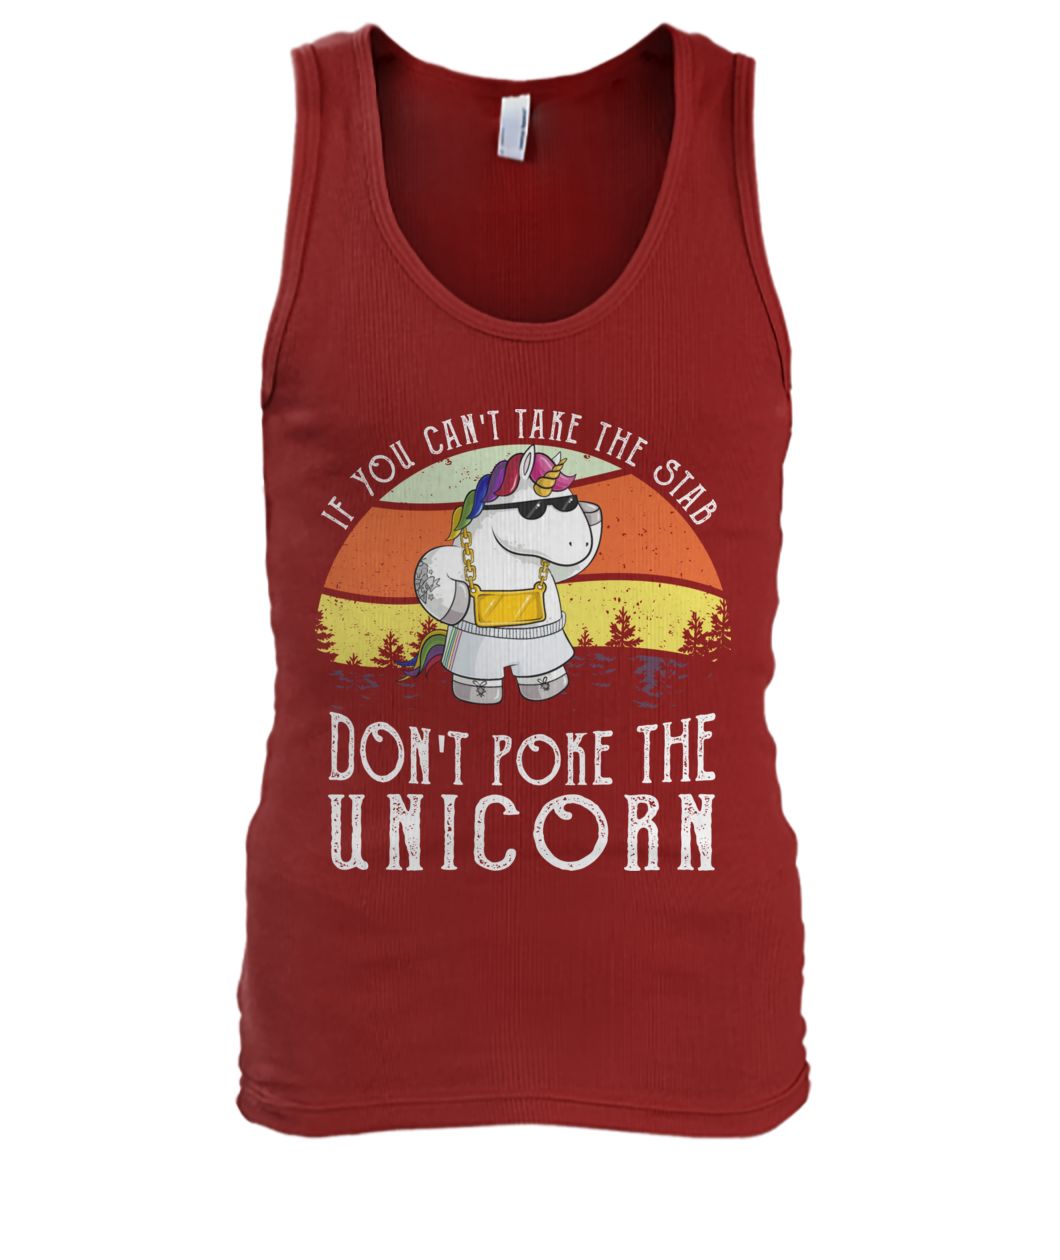 Vintage if you can't take the stab don't poke the unicorn men's tank top